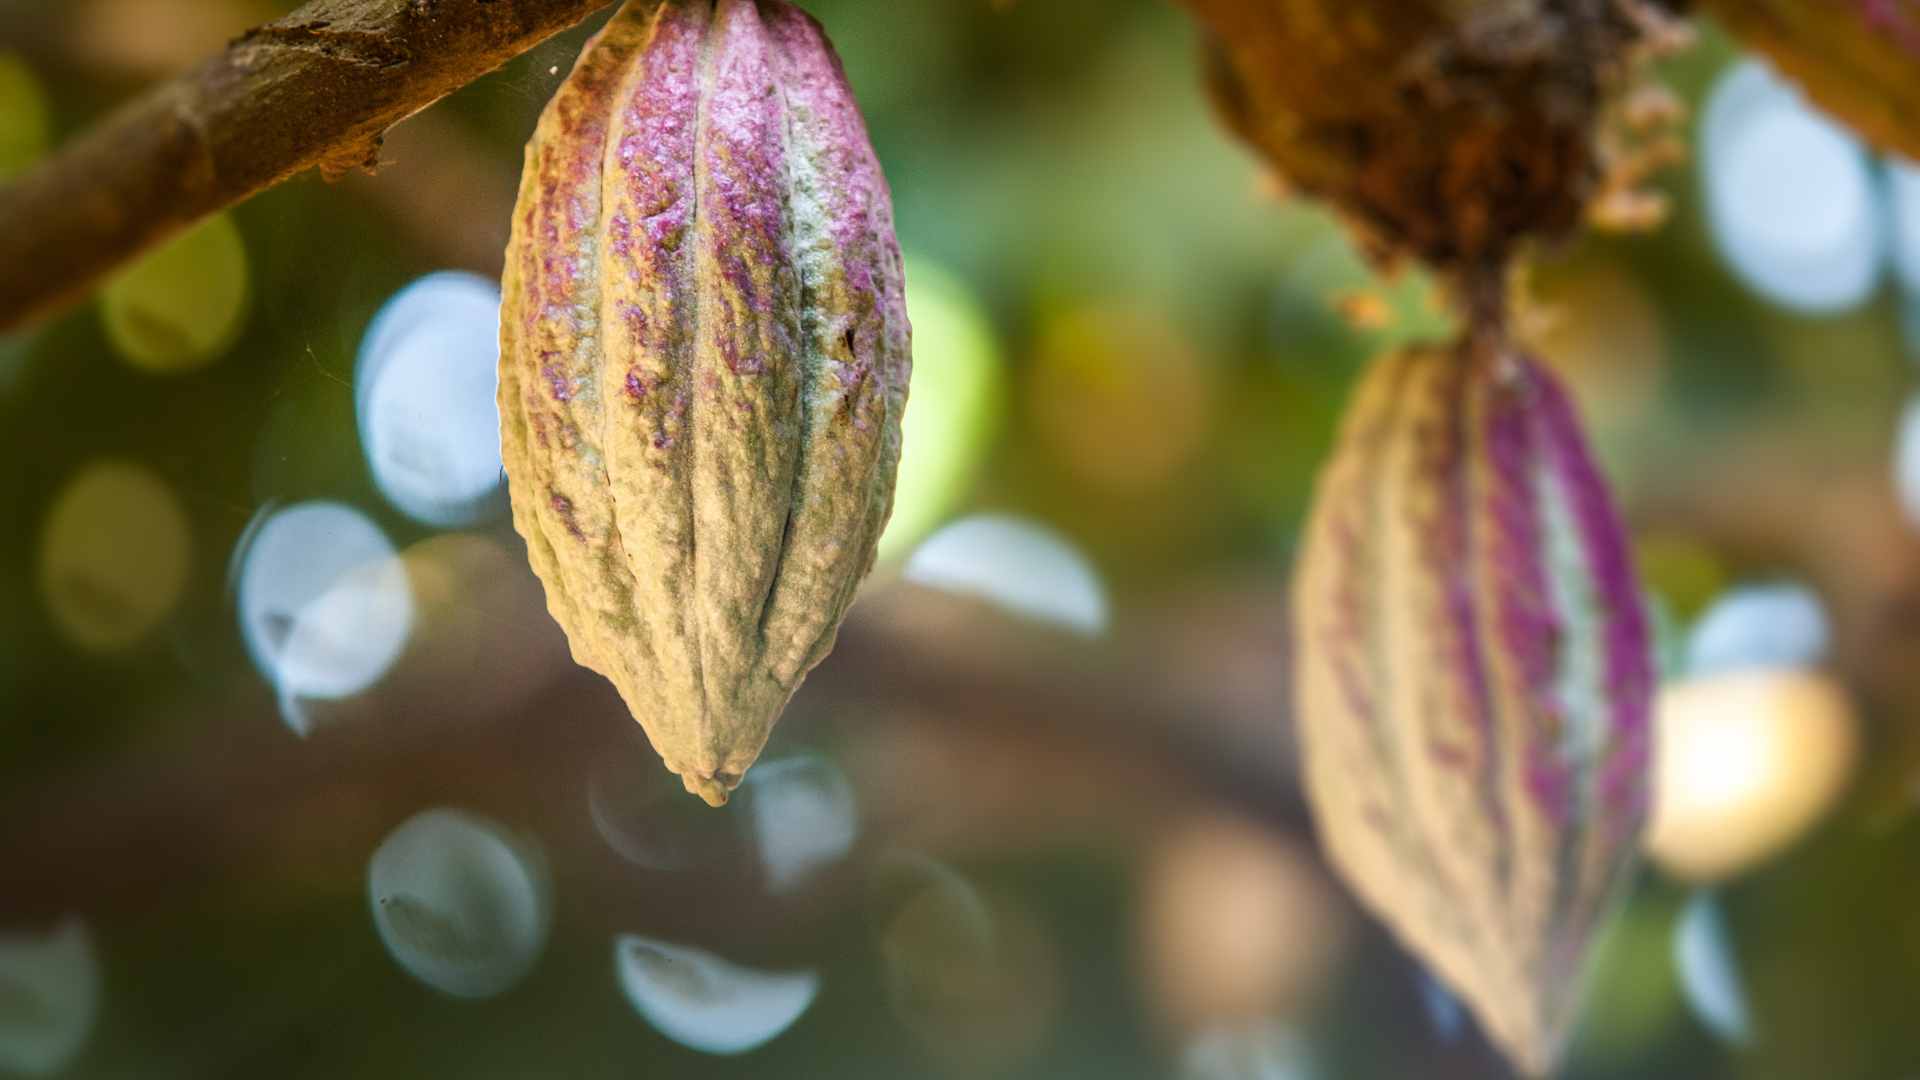 Cocoa pods hanging from a tree with soft focus. | Hotel Chocolat